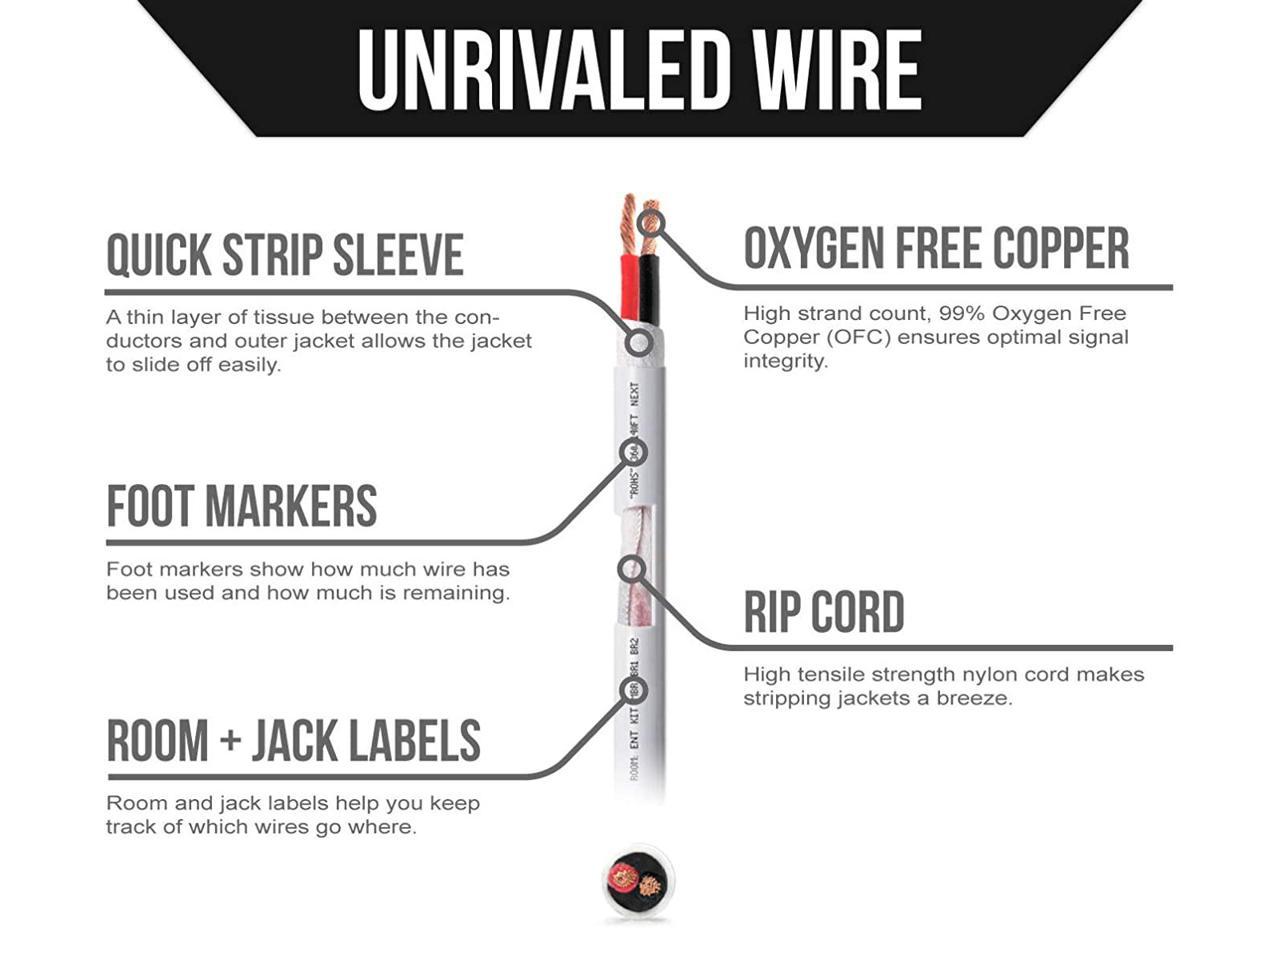 Black Oxygen-Free Copper and Outdoor/In Ground CL2/CL3 Rated OFC 10 AWG/Gauge 2 Conductor Direct Burial - 500 Foot Spool UL Listed in Wall Voltive 10/2 Speaker Wire 